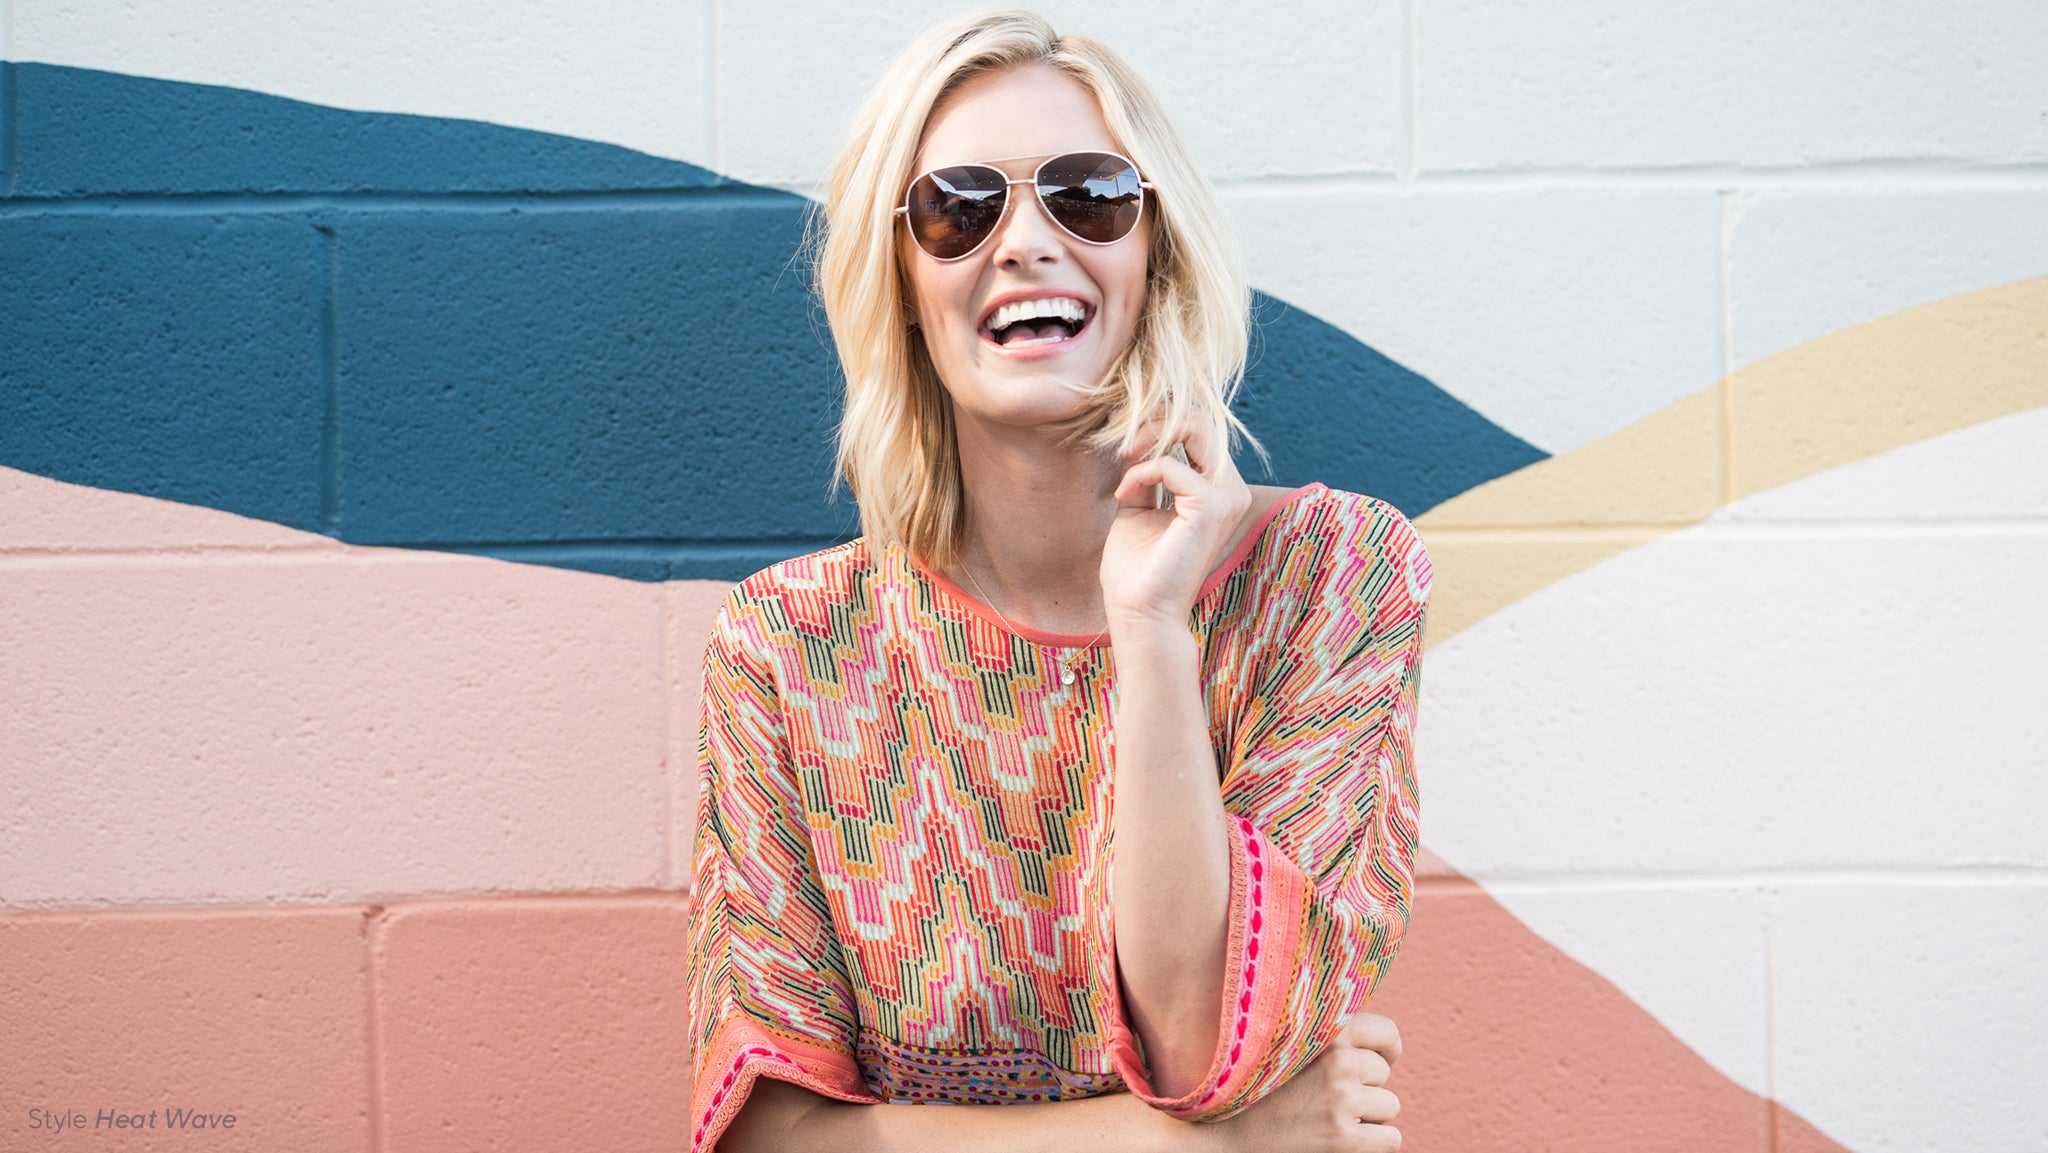 Blonde woman laughing in front of mural wearing Peepers Heat Wave sunglasses